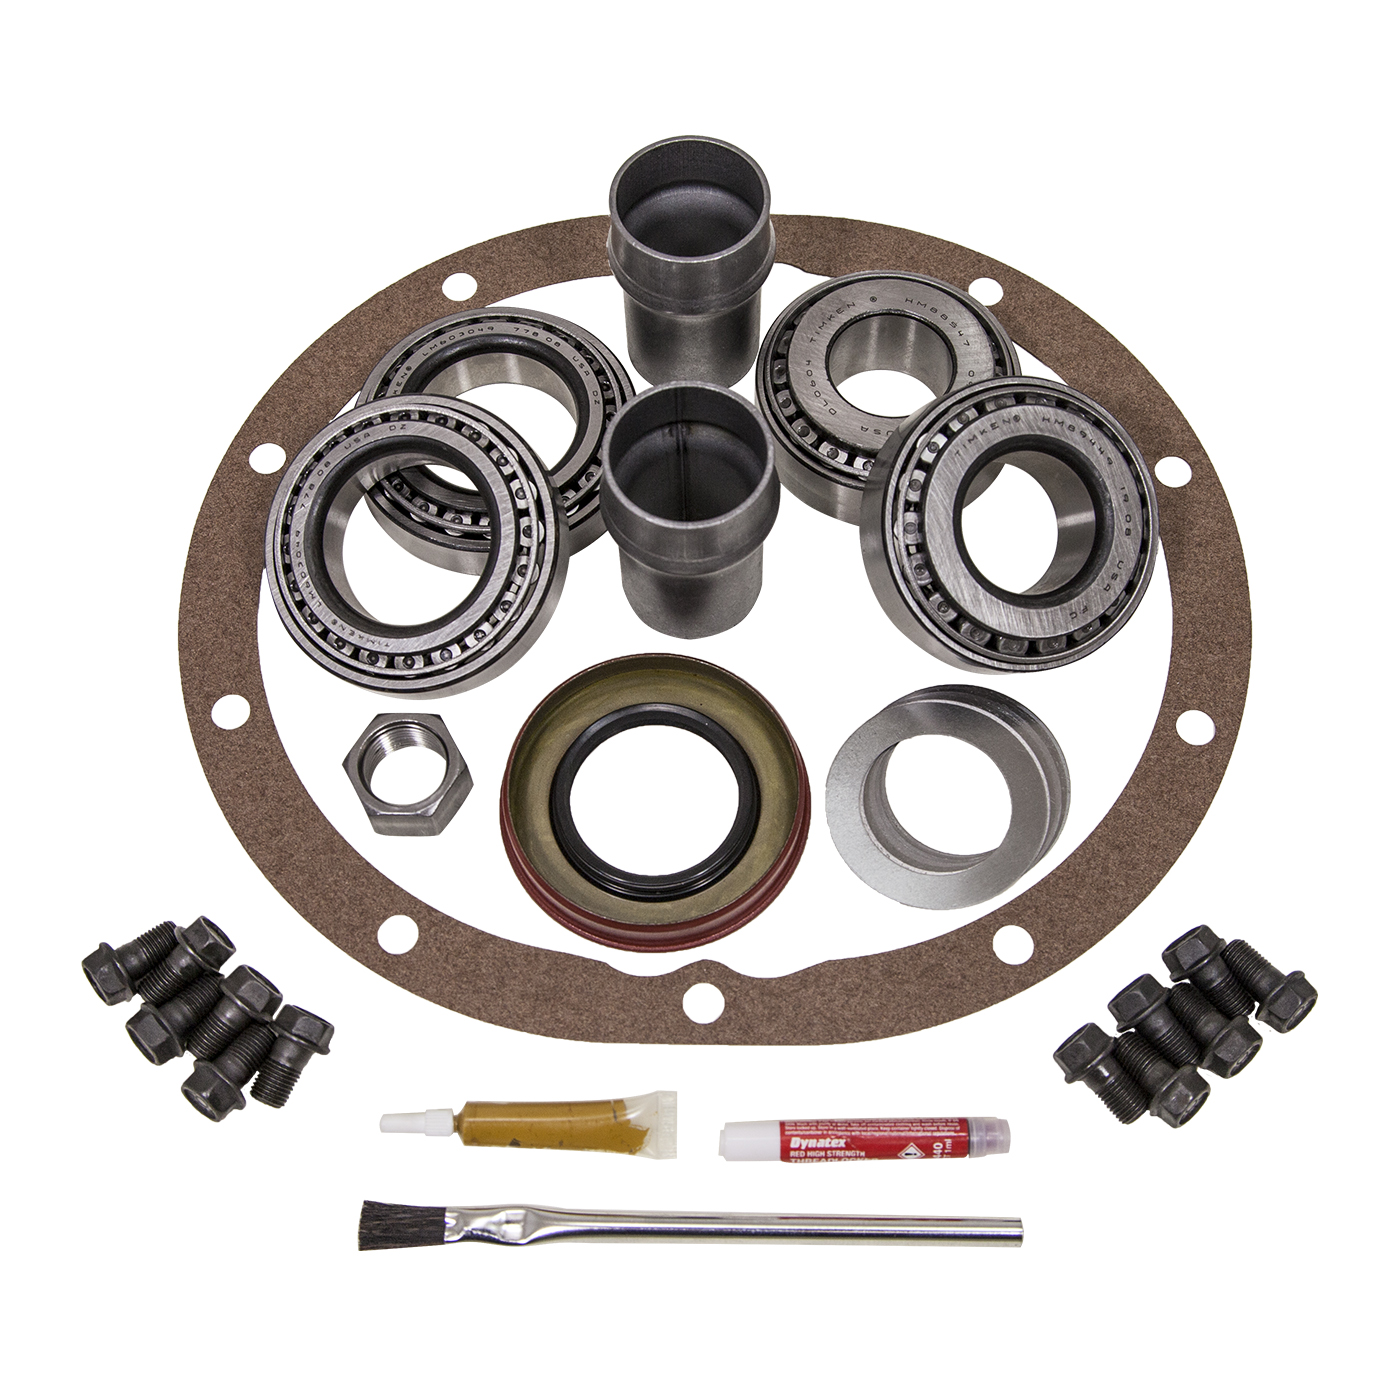 USA Standard 37047 Master Overhaul Kit, For GM Chevy 55P And 55T Differential